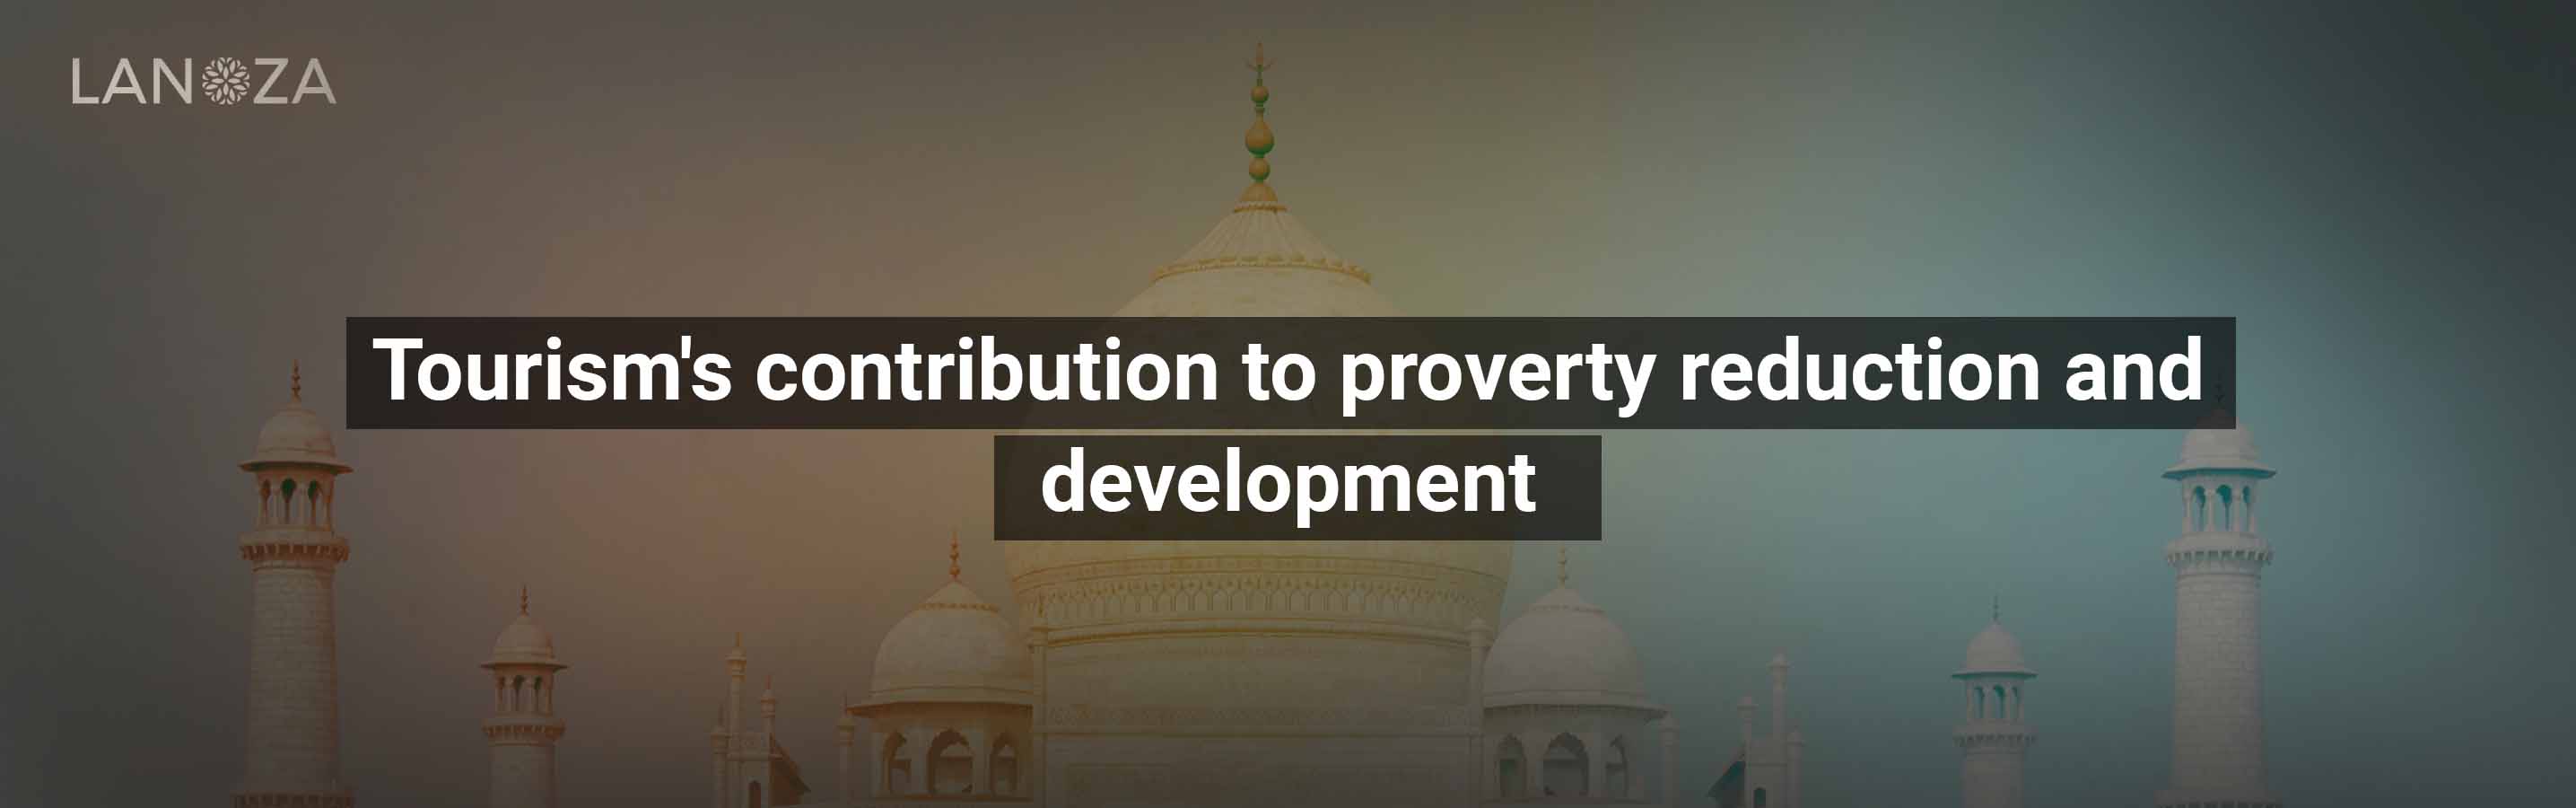 tourisms-contribution-to-poverty-reduction-and-development